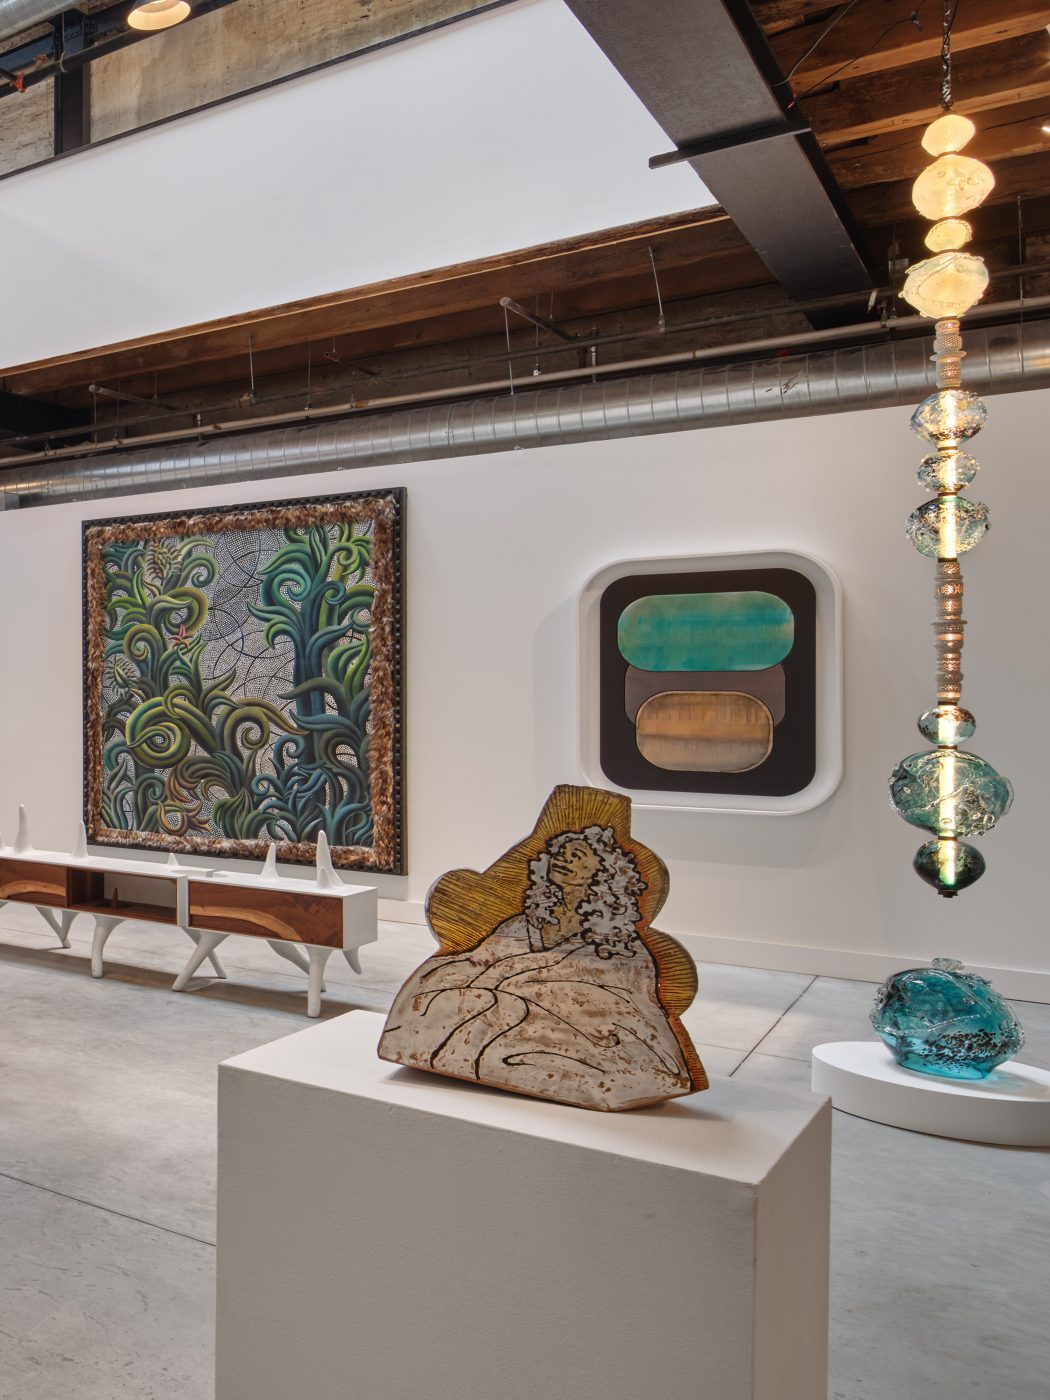 Works in the inaugural exhibition of Wexler Gallery's new Fishtown location